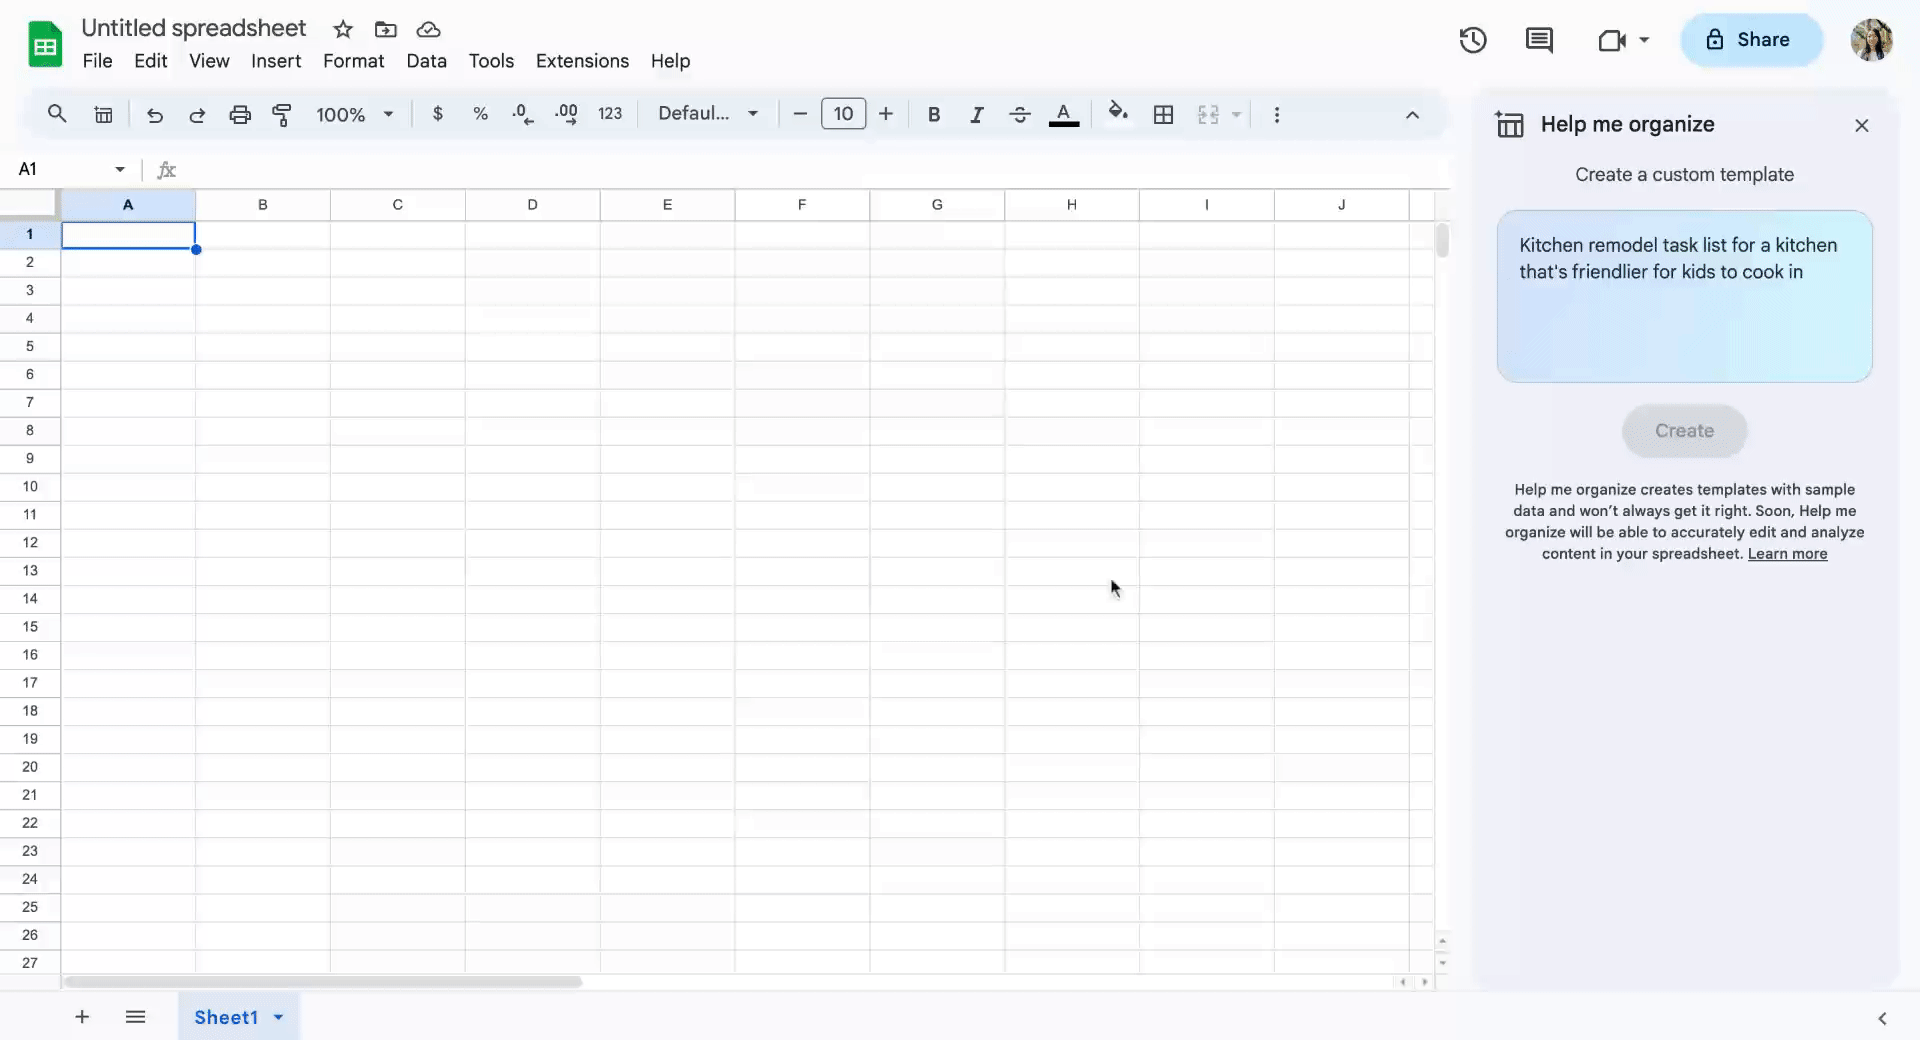 An animation showing someone using "Help me organize" in Sheets to create a project tracker for building a new website